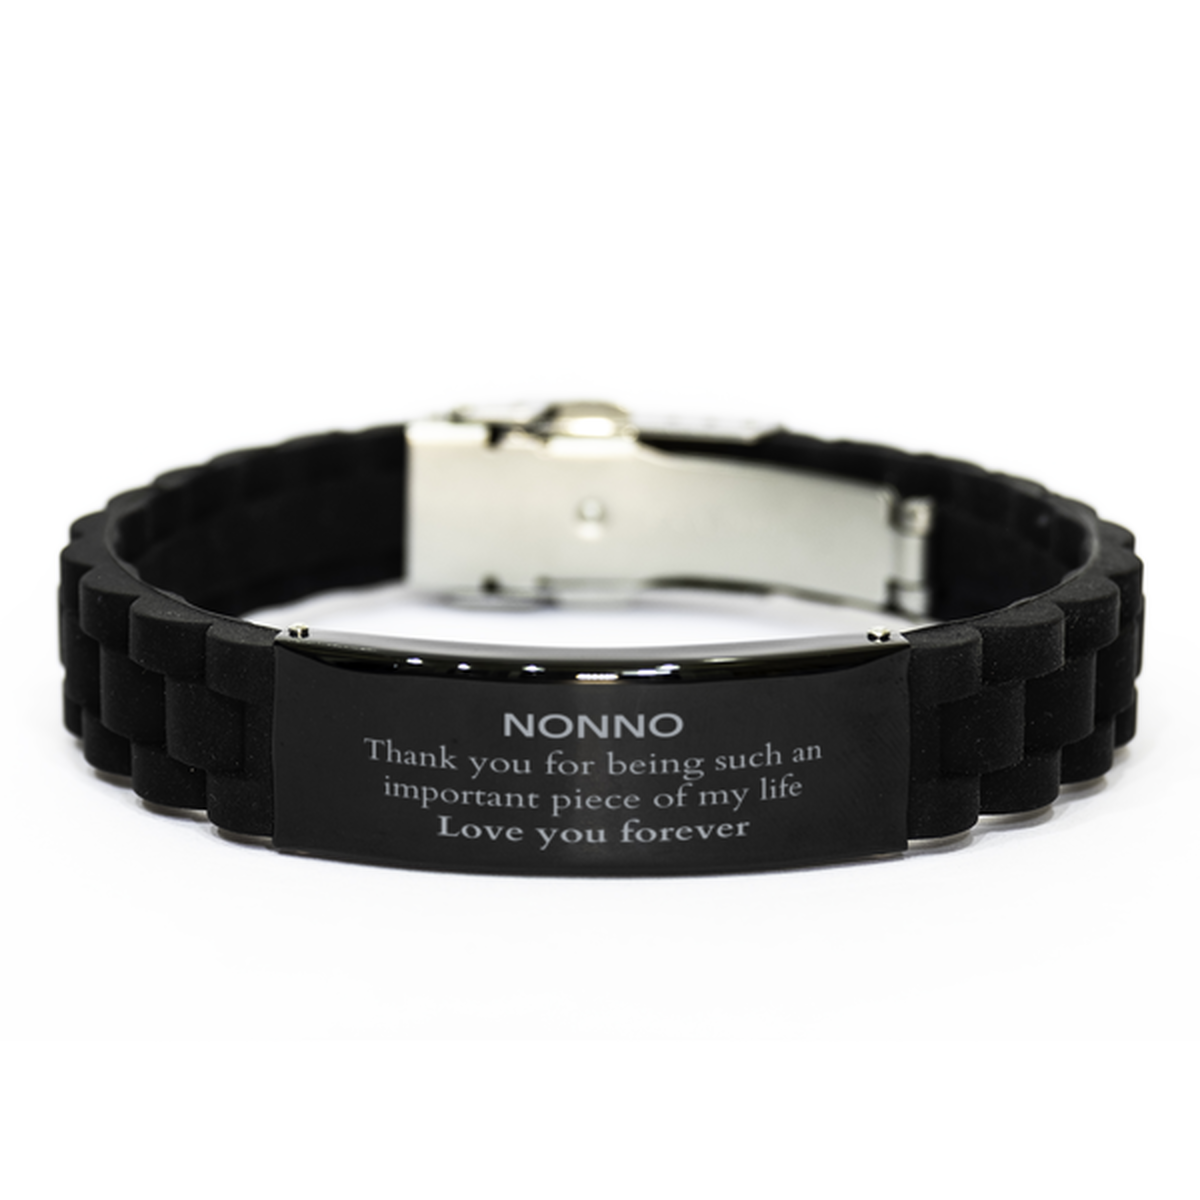 Appropriate Nonno Black Glidelock Clasp Bracelet Epic Birthday Gifts for Nonno Thank you for being such an important piece of my life Nonno Christmas Mothers Fathers Day